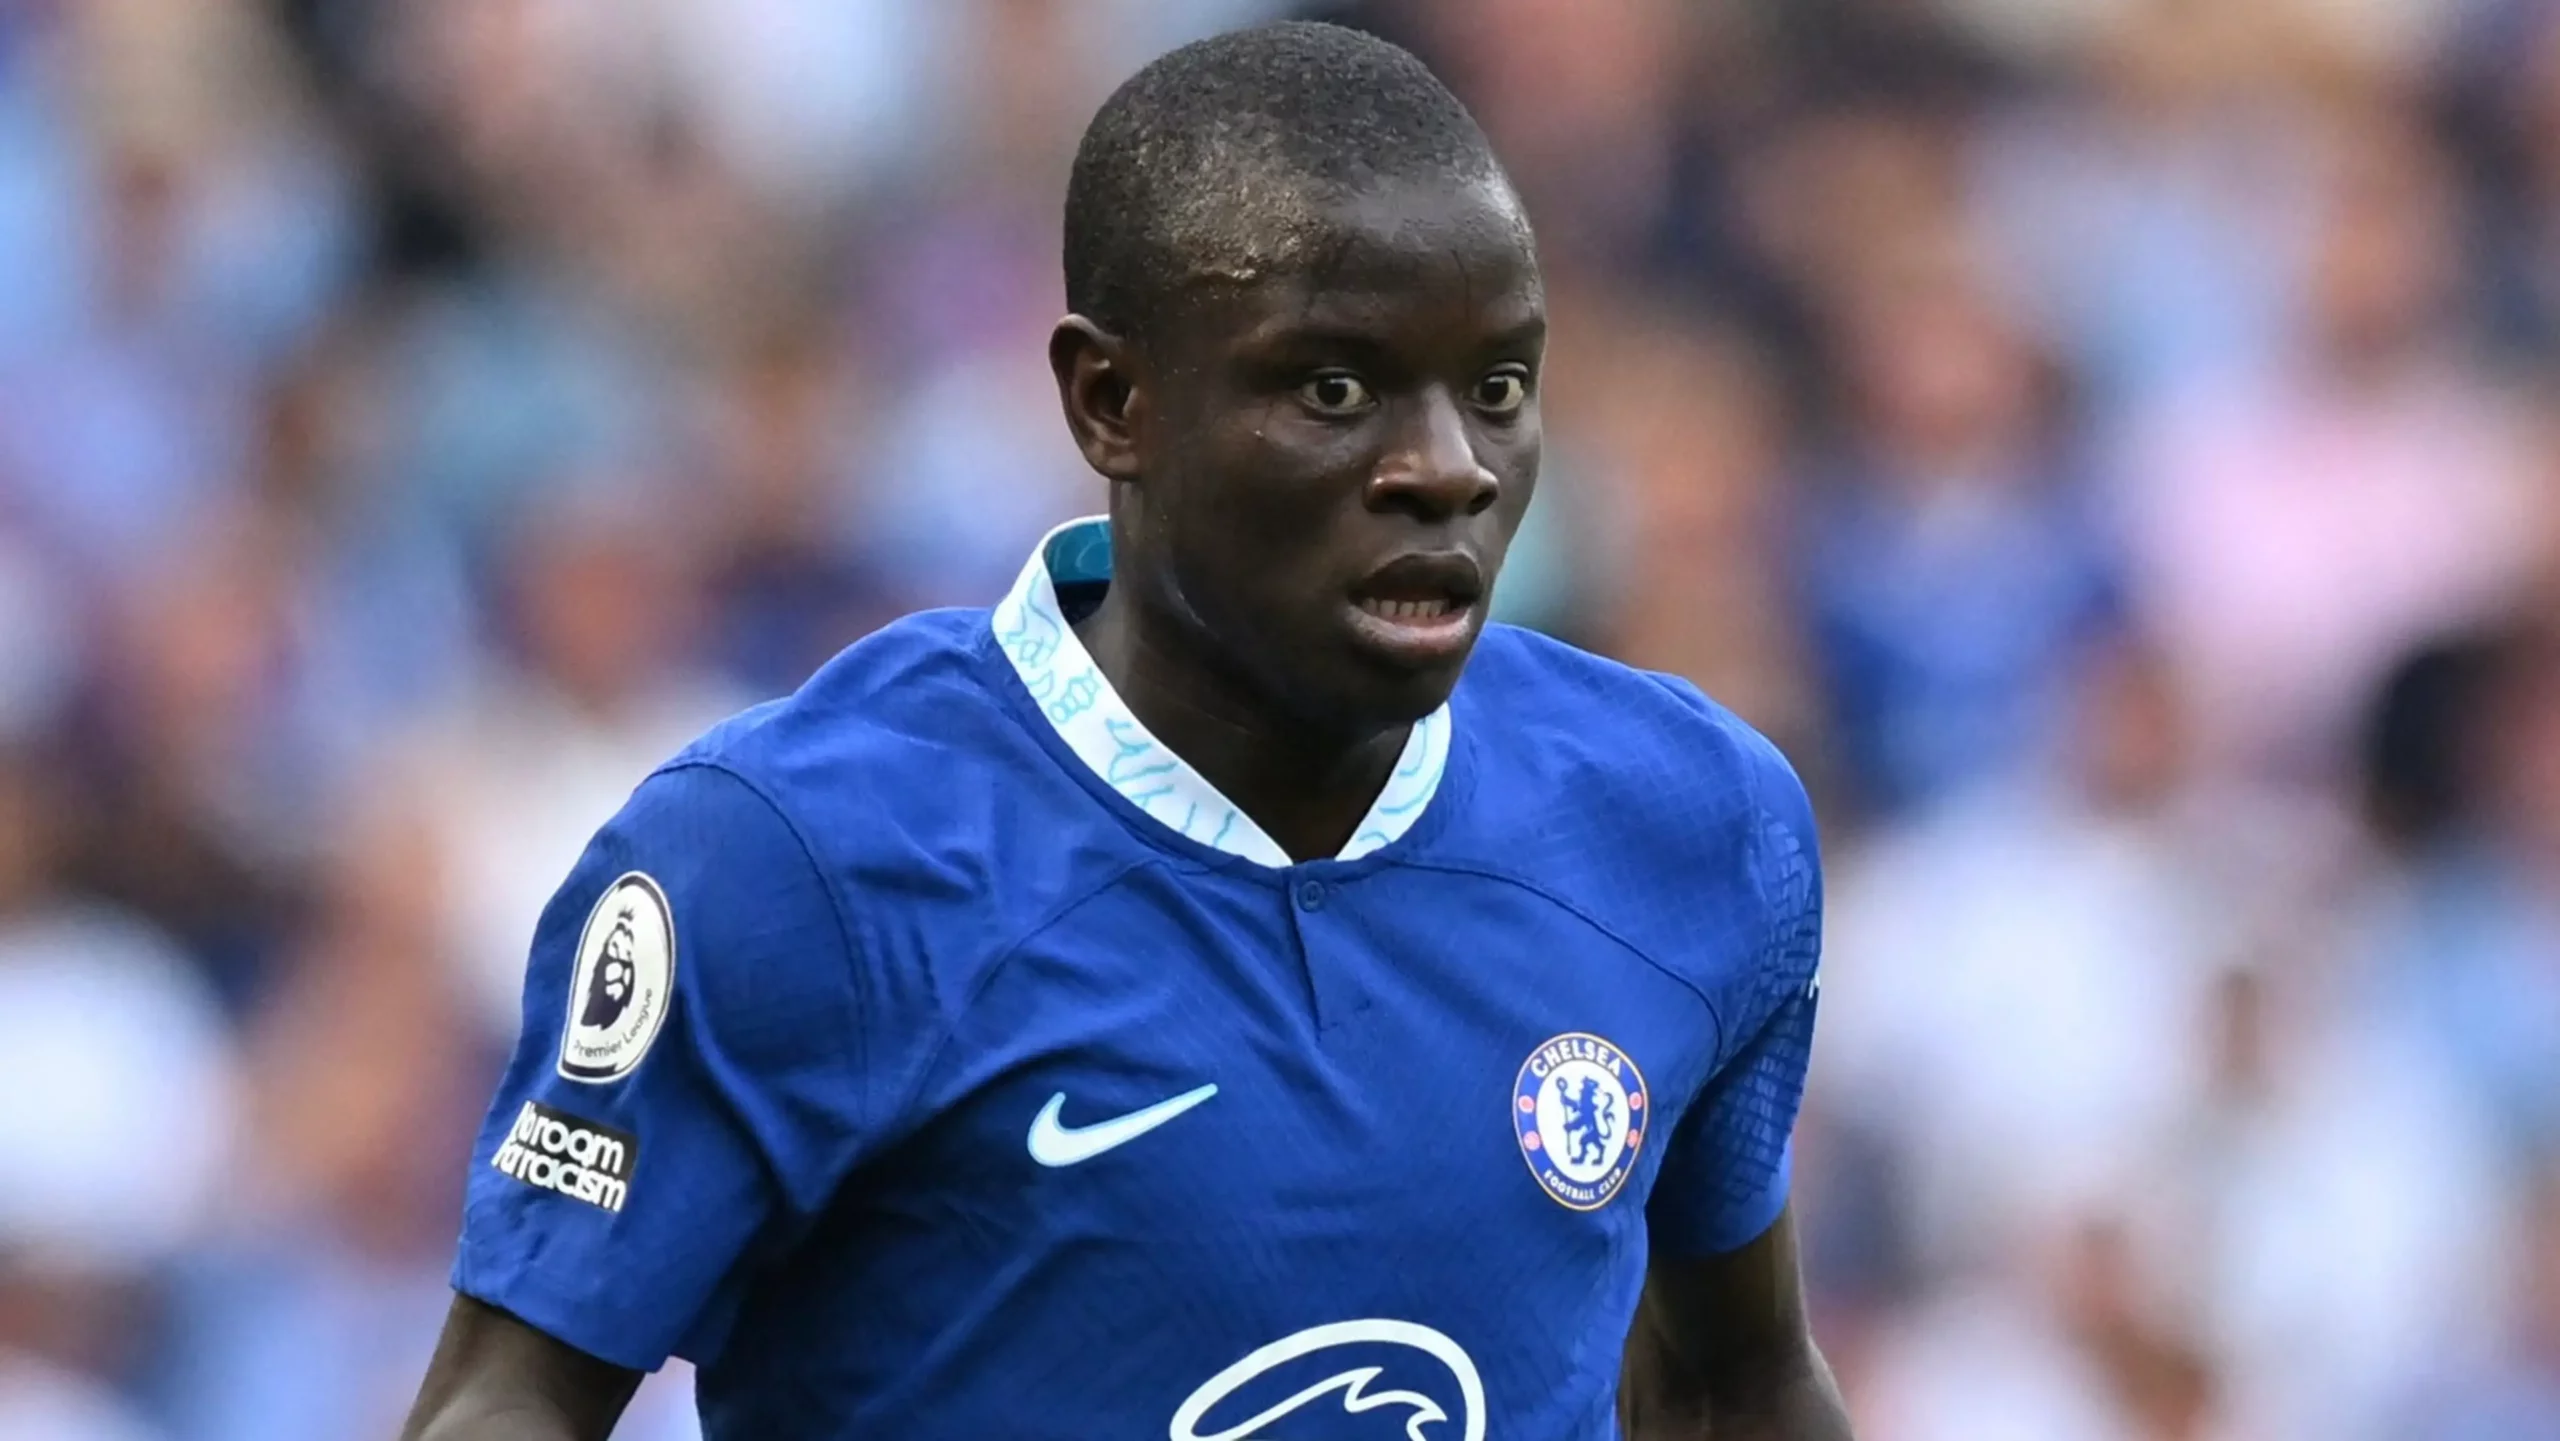 Chelsea Transfer News: Chelsea has identified the replacement of N'Golo Kante